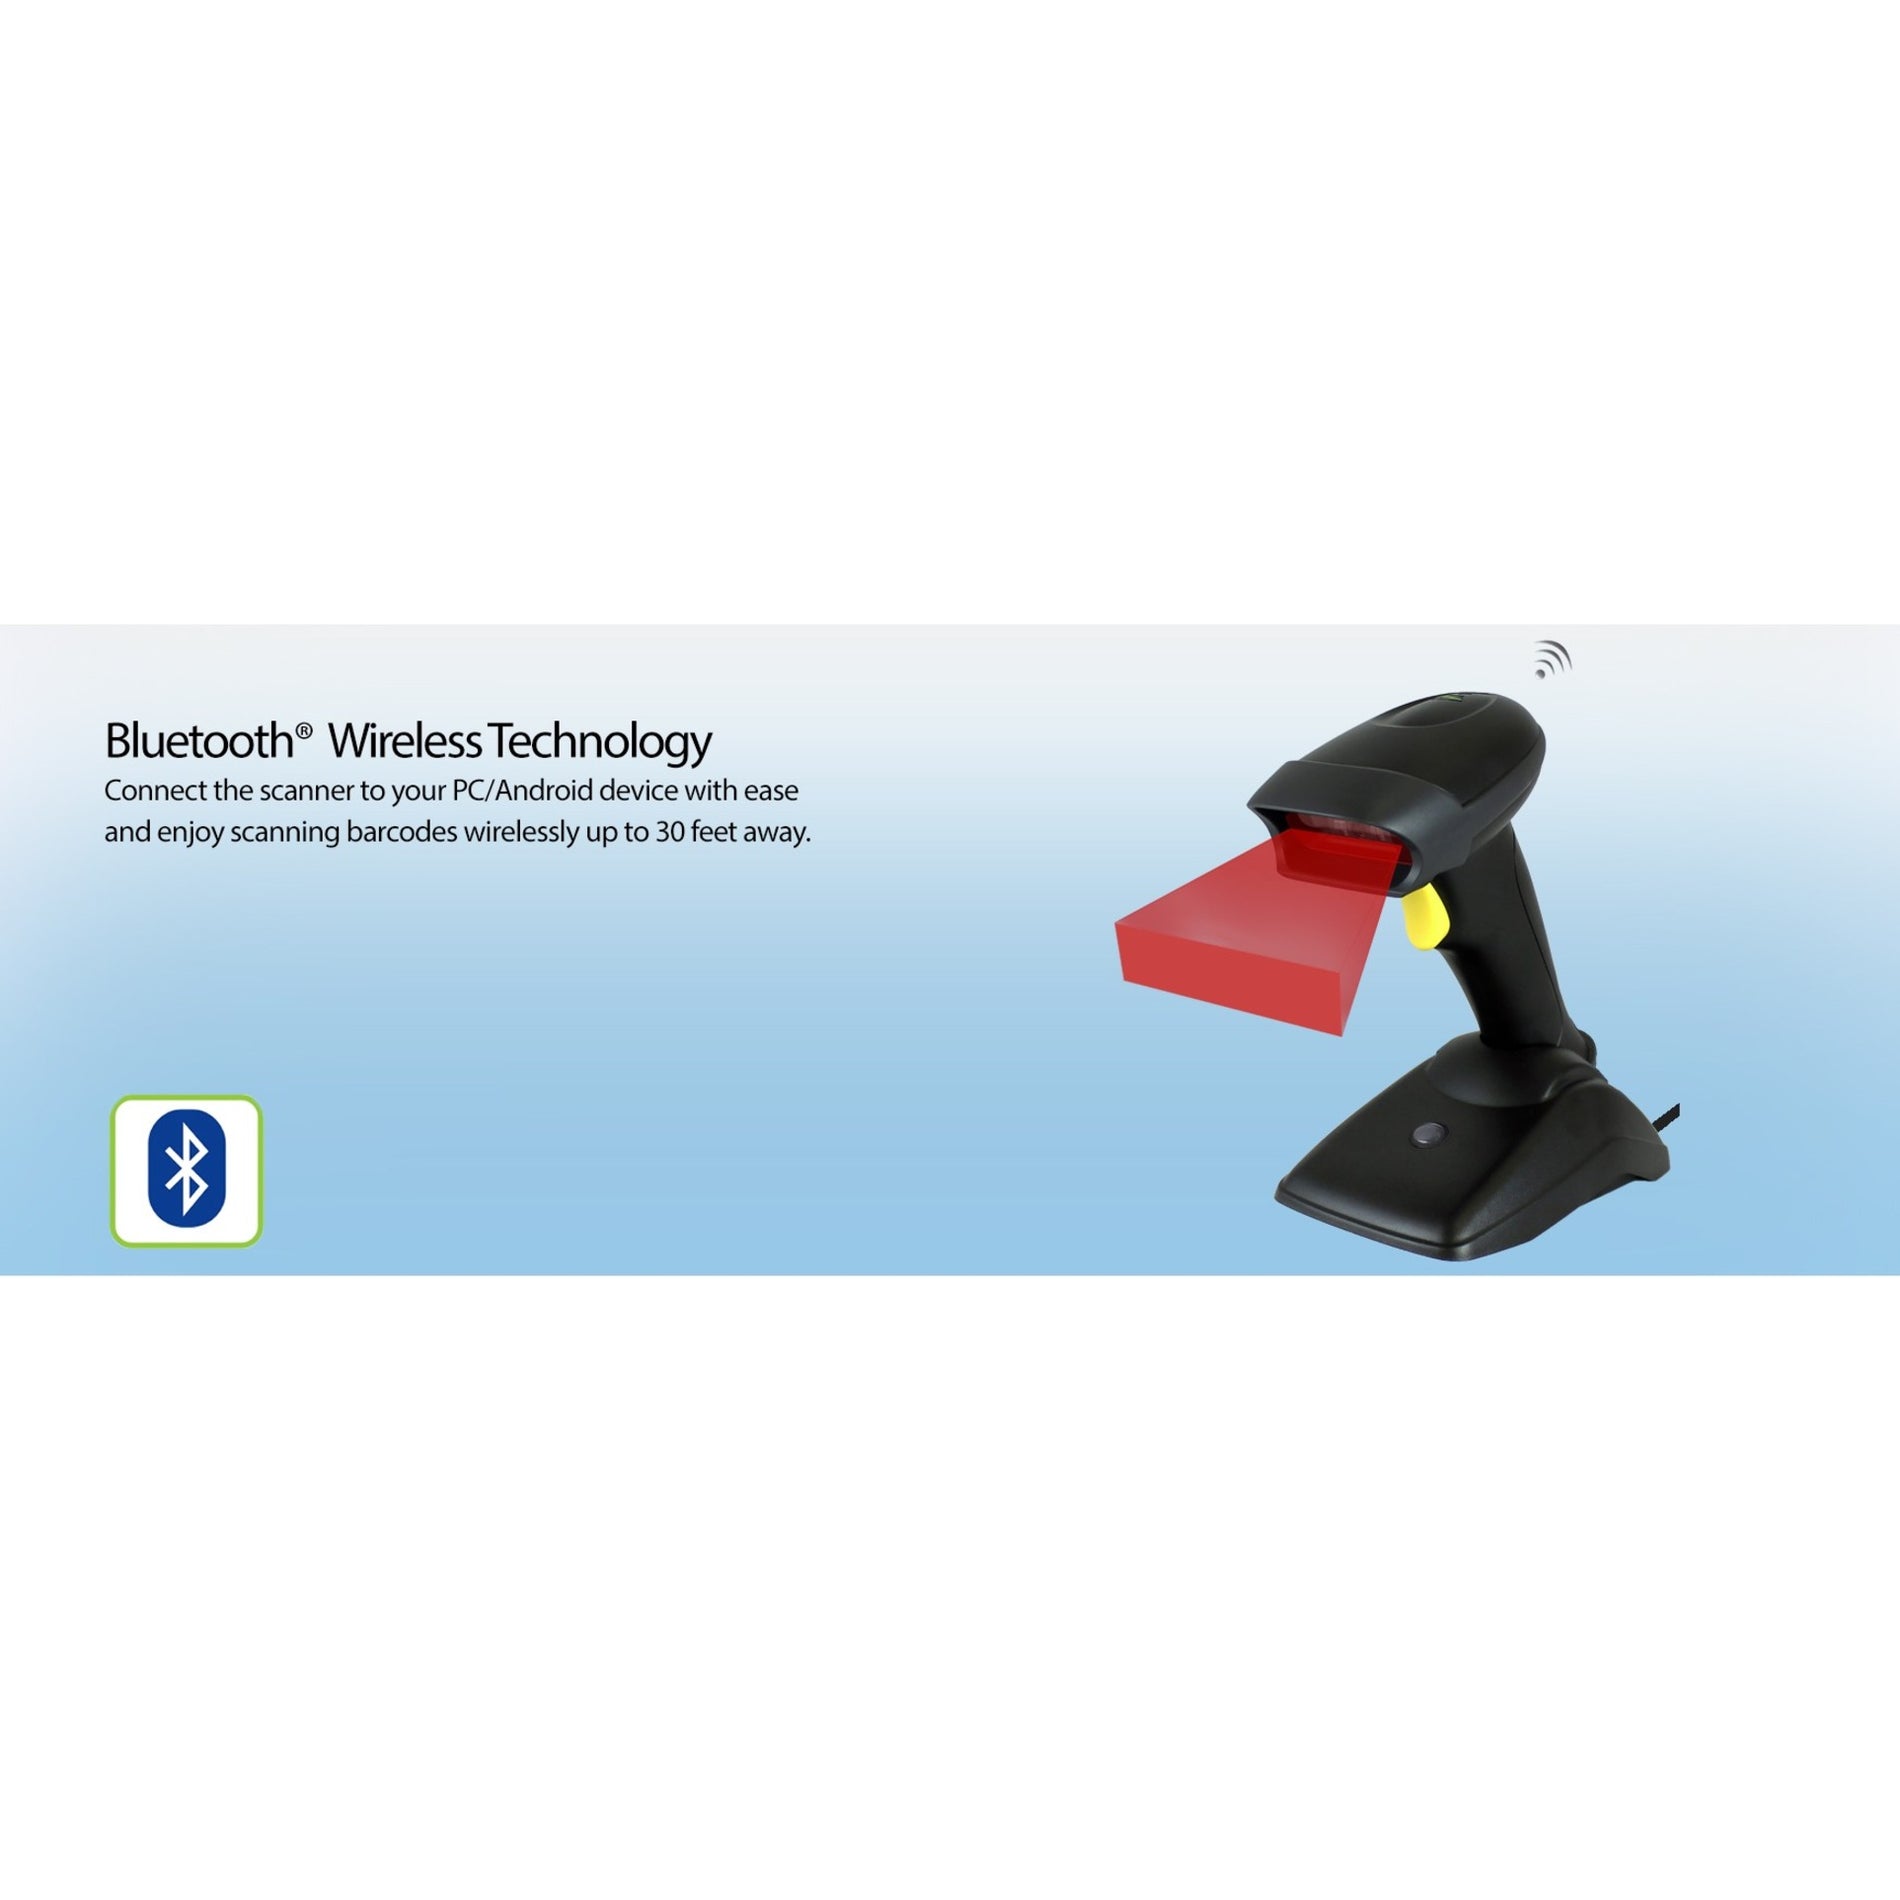 Adesso NUSCAN 2500TB Bluetooth Handheld Barcode Scanner, Long Range, Spill Resistant, Antimicrobial